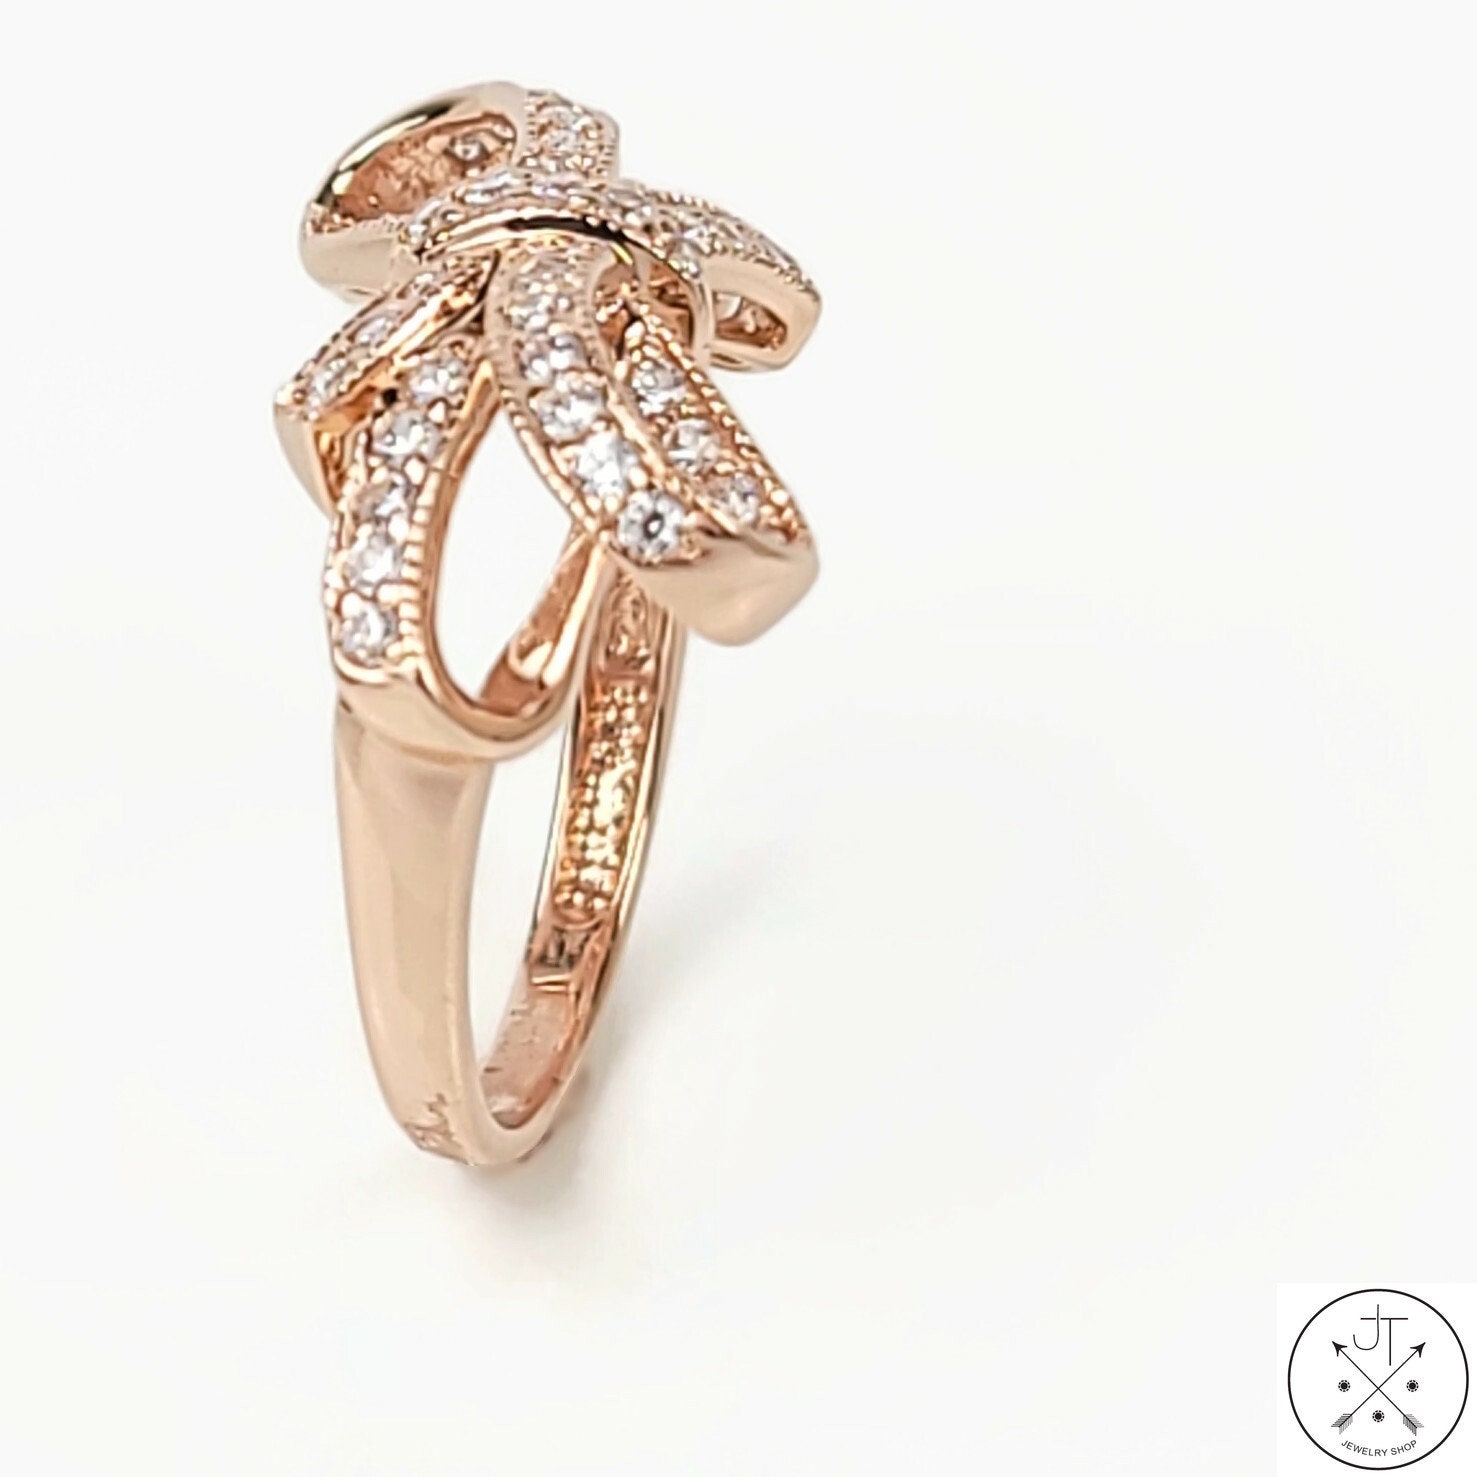 14k Rose Gold Ribbon Ring with Cubic Zirconia Size 5.25 – JT